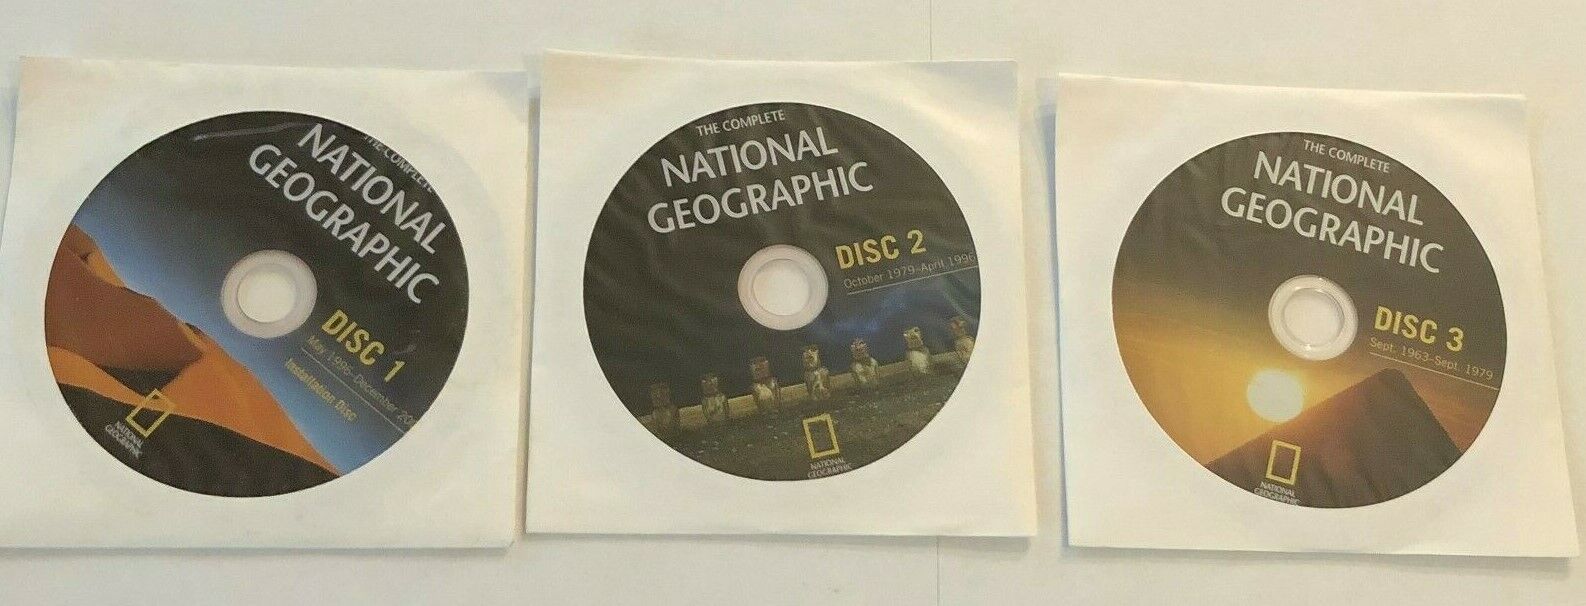 The Complete National Geographic PC/Mac Loose Discs 1, 2, and 3 ONLY (1963-2009)